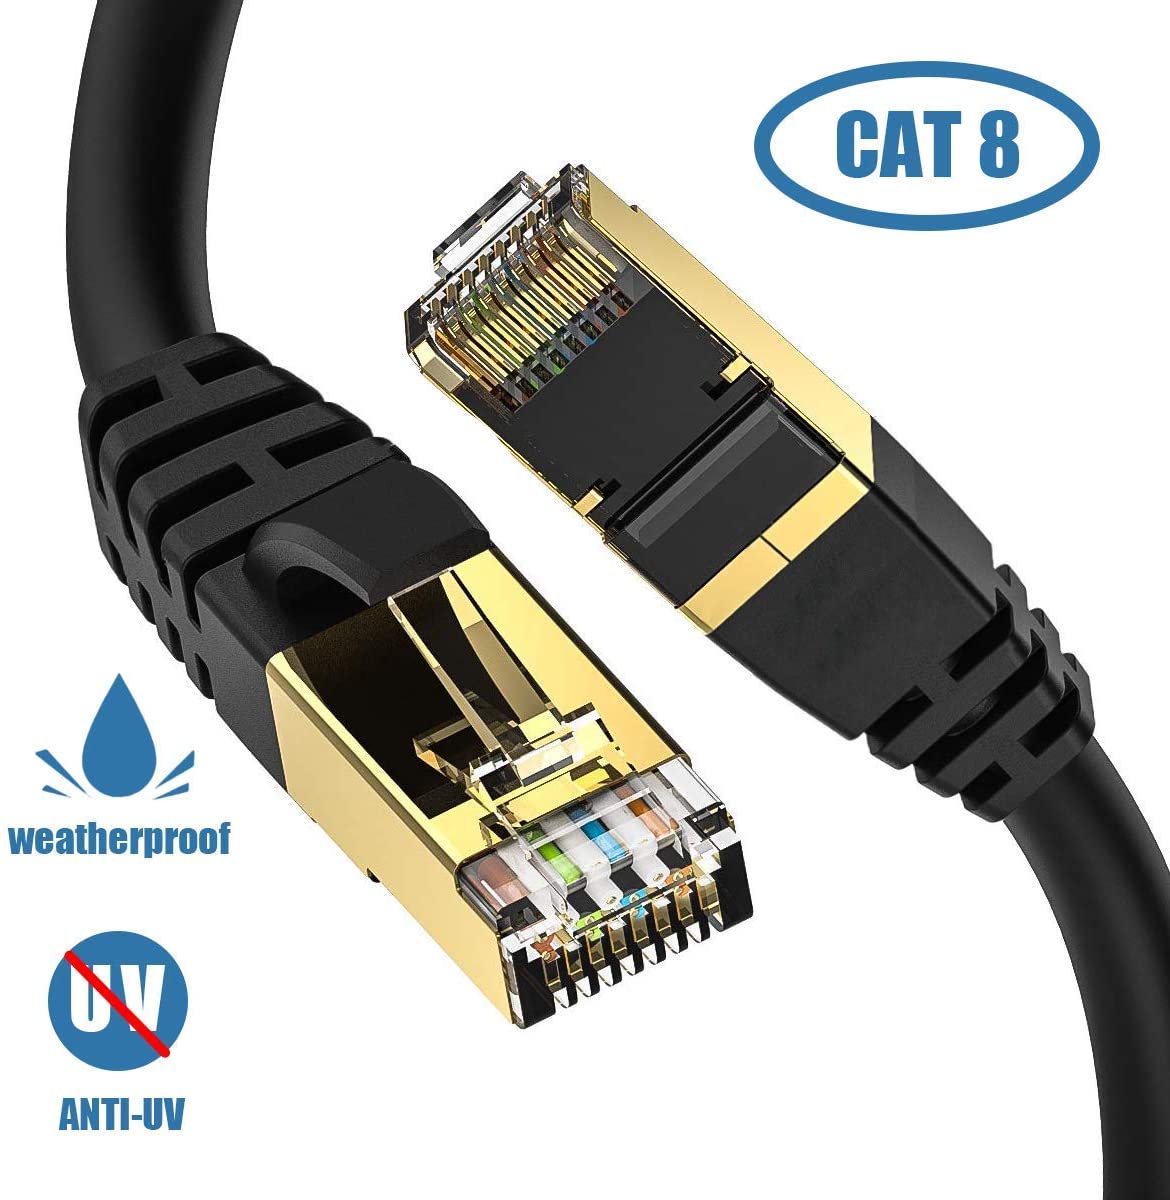 Cat8 Ethernet Cable 40FT (12.2 Meters), High Speed Gigabit LAN Cable,  Outdoor Network Cable, 26AWG Heavy Duty 40Gbps